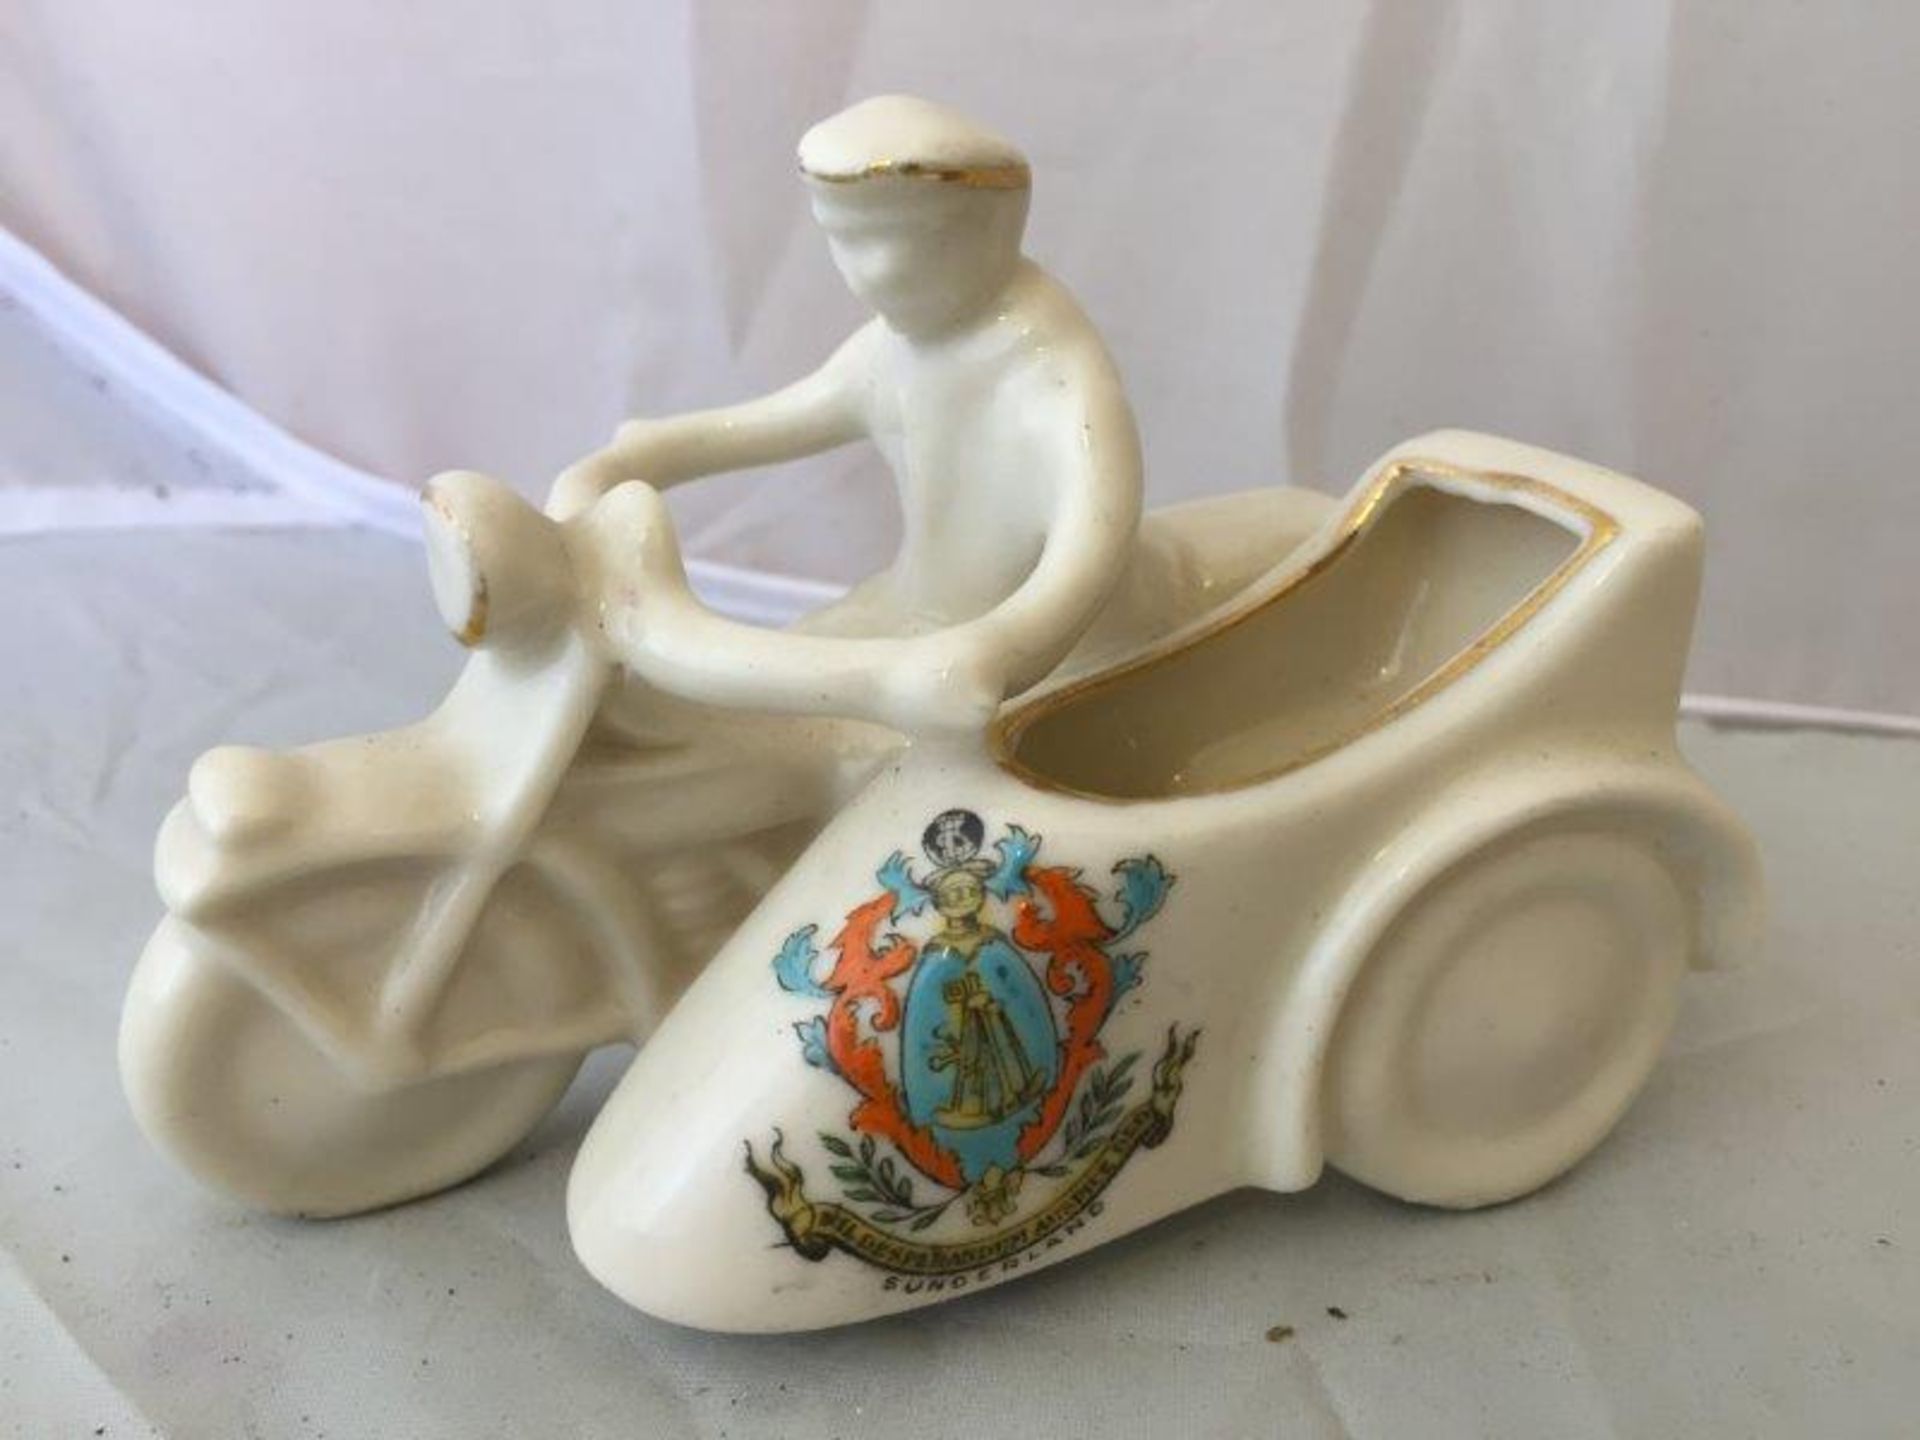 A Carlton China porcelain model of a dispatch rider and side car, with coat of arms for Sunderland.